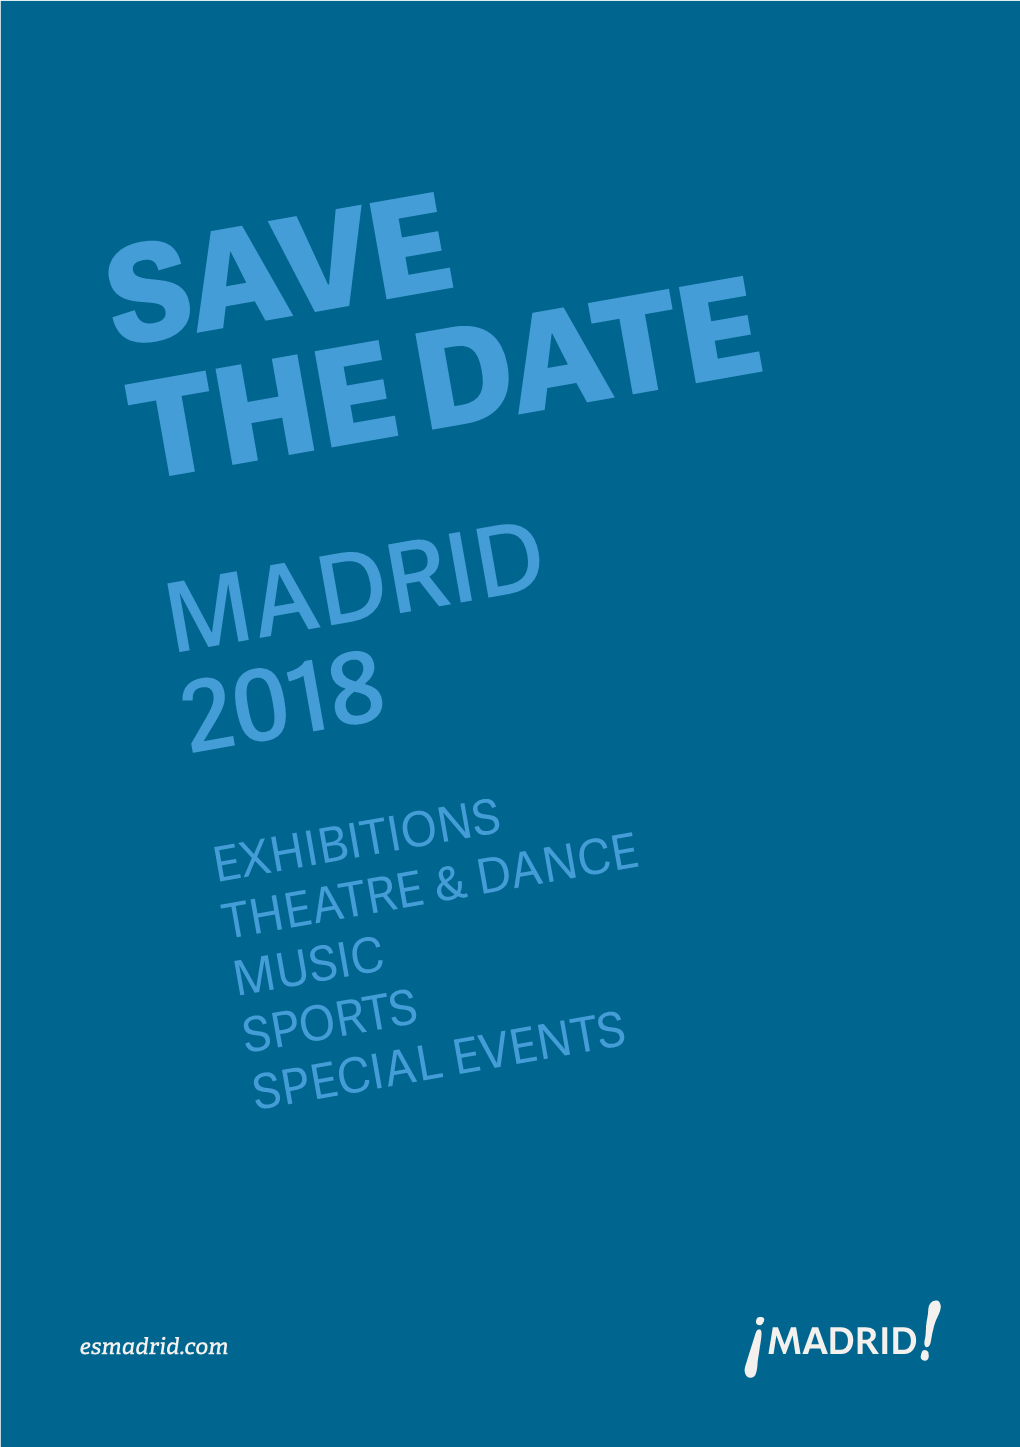 Exhibitions Theatre & Dance Music Sports Special Events